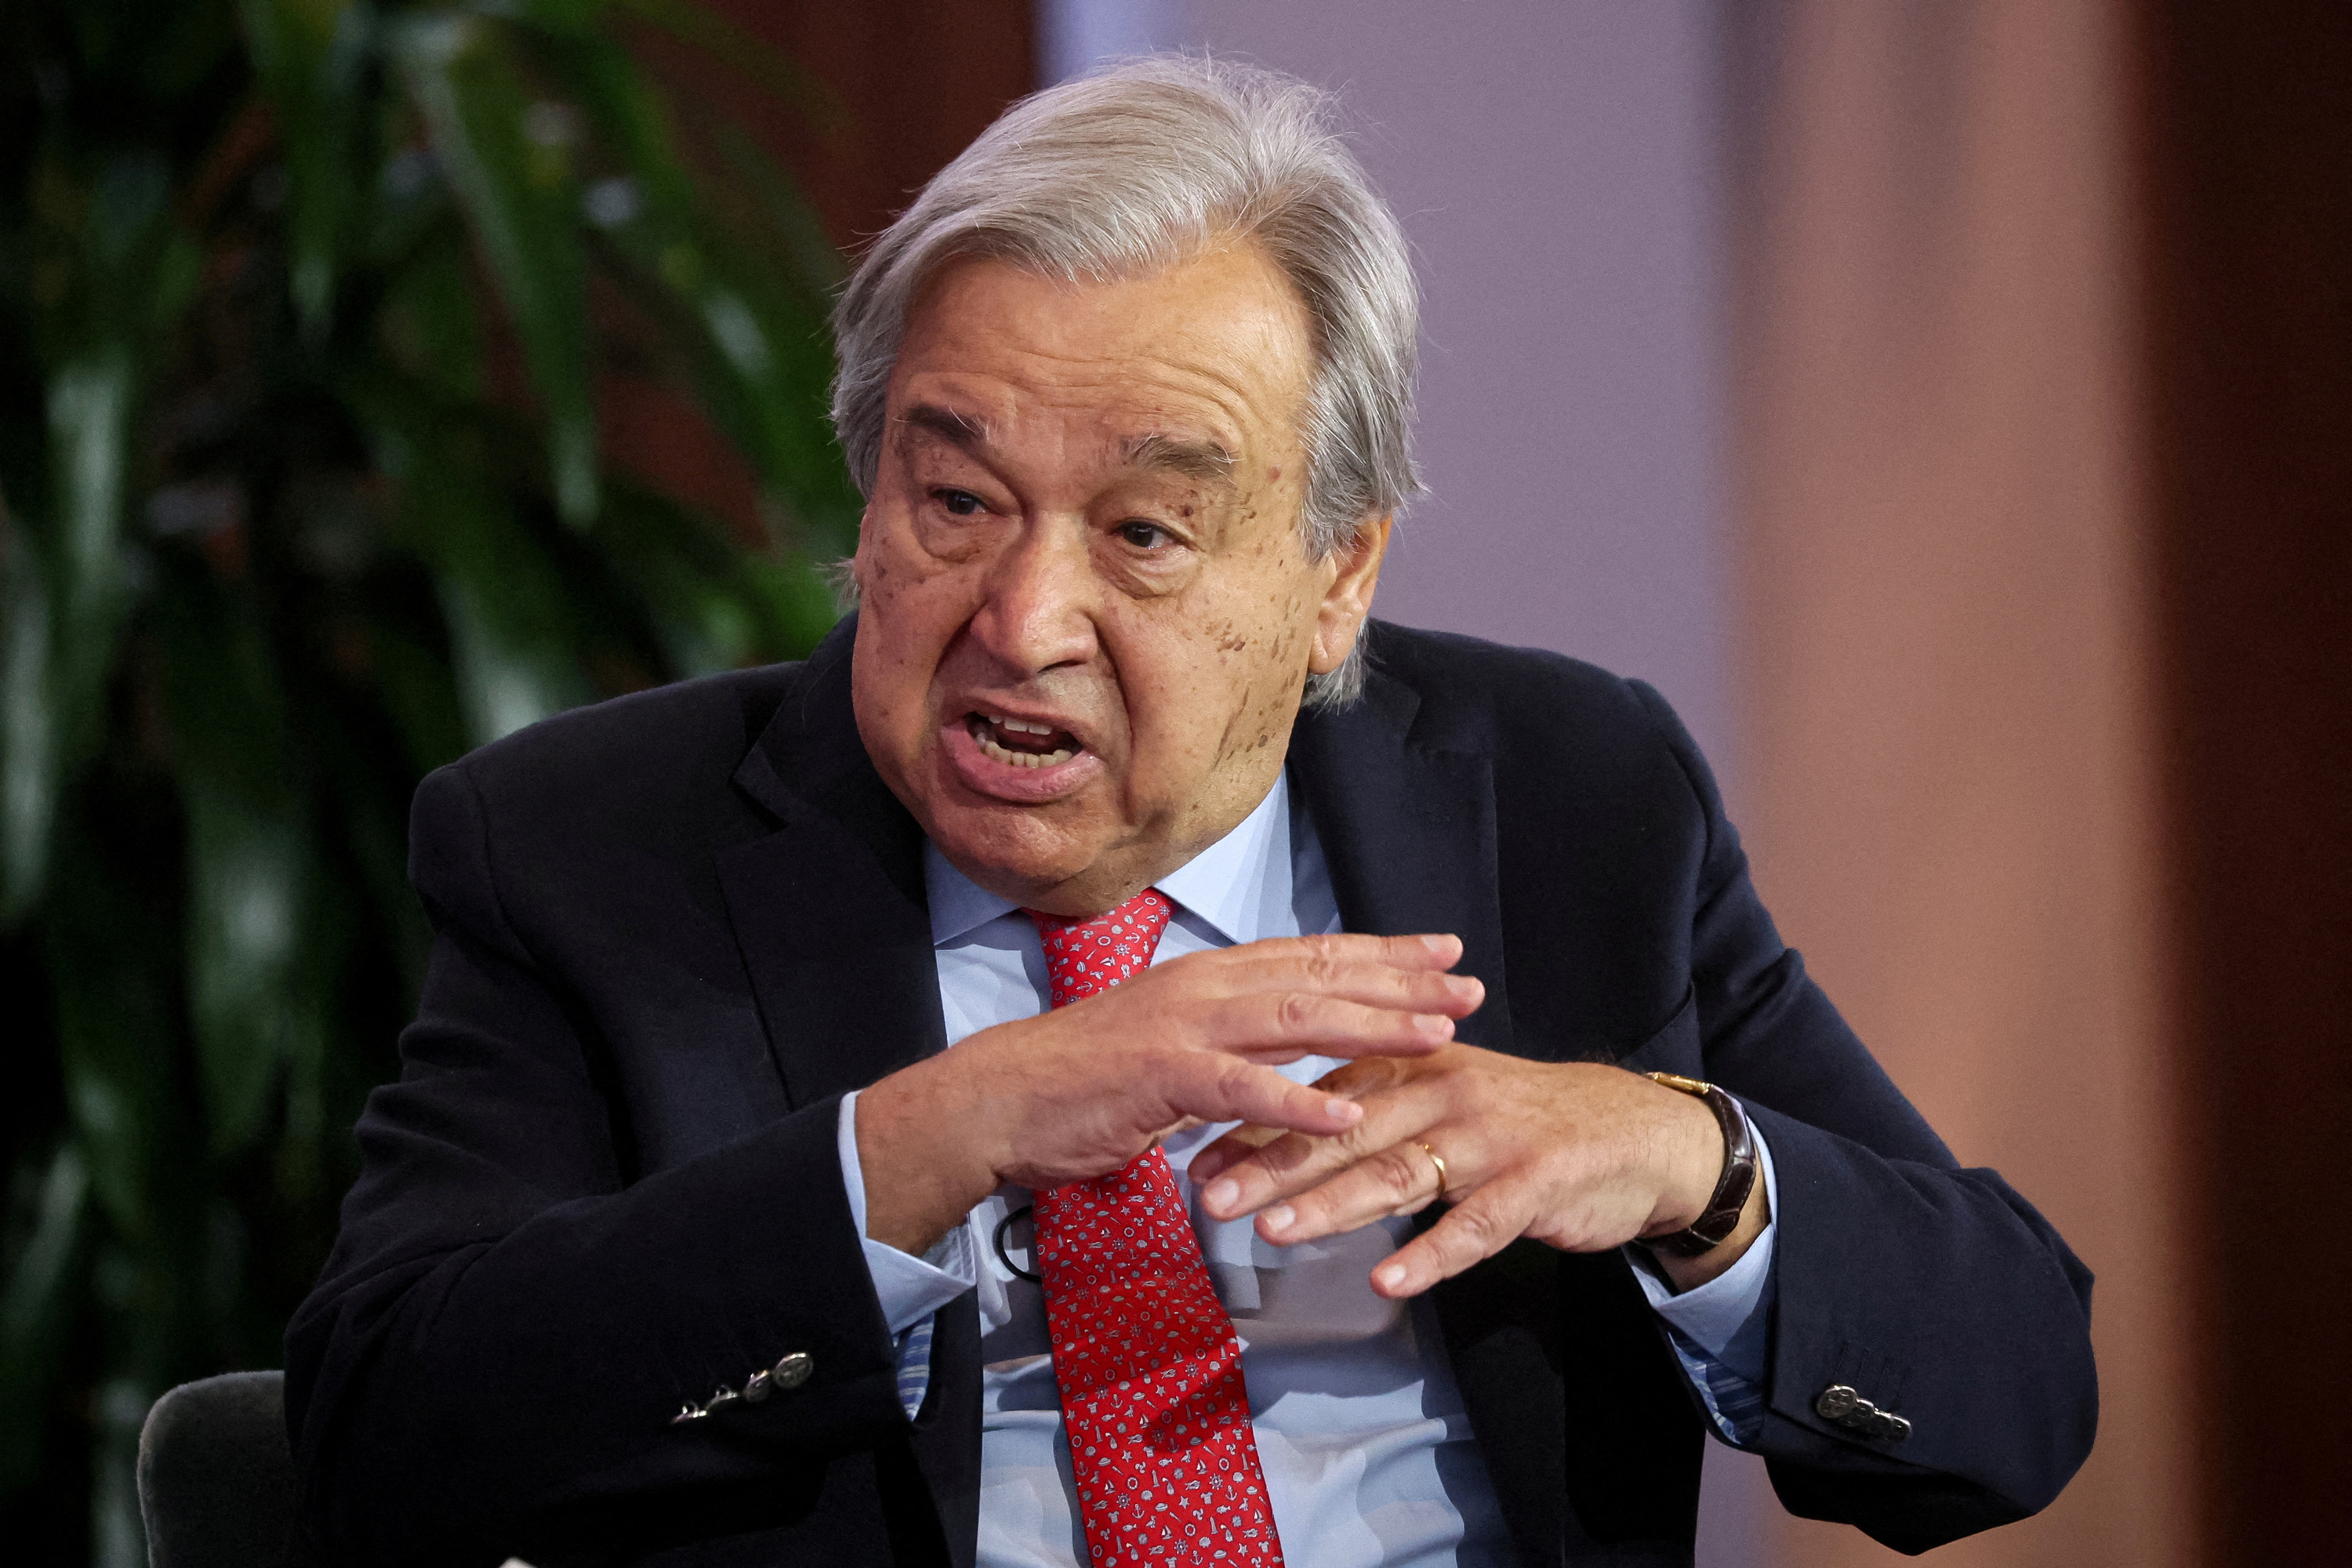 Antonio Guterres speaks at the ReutersNEXT Newsmaker event in New York City, on November 8.